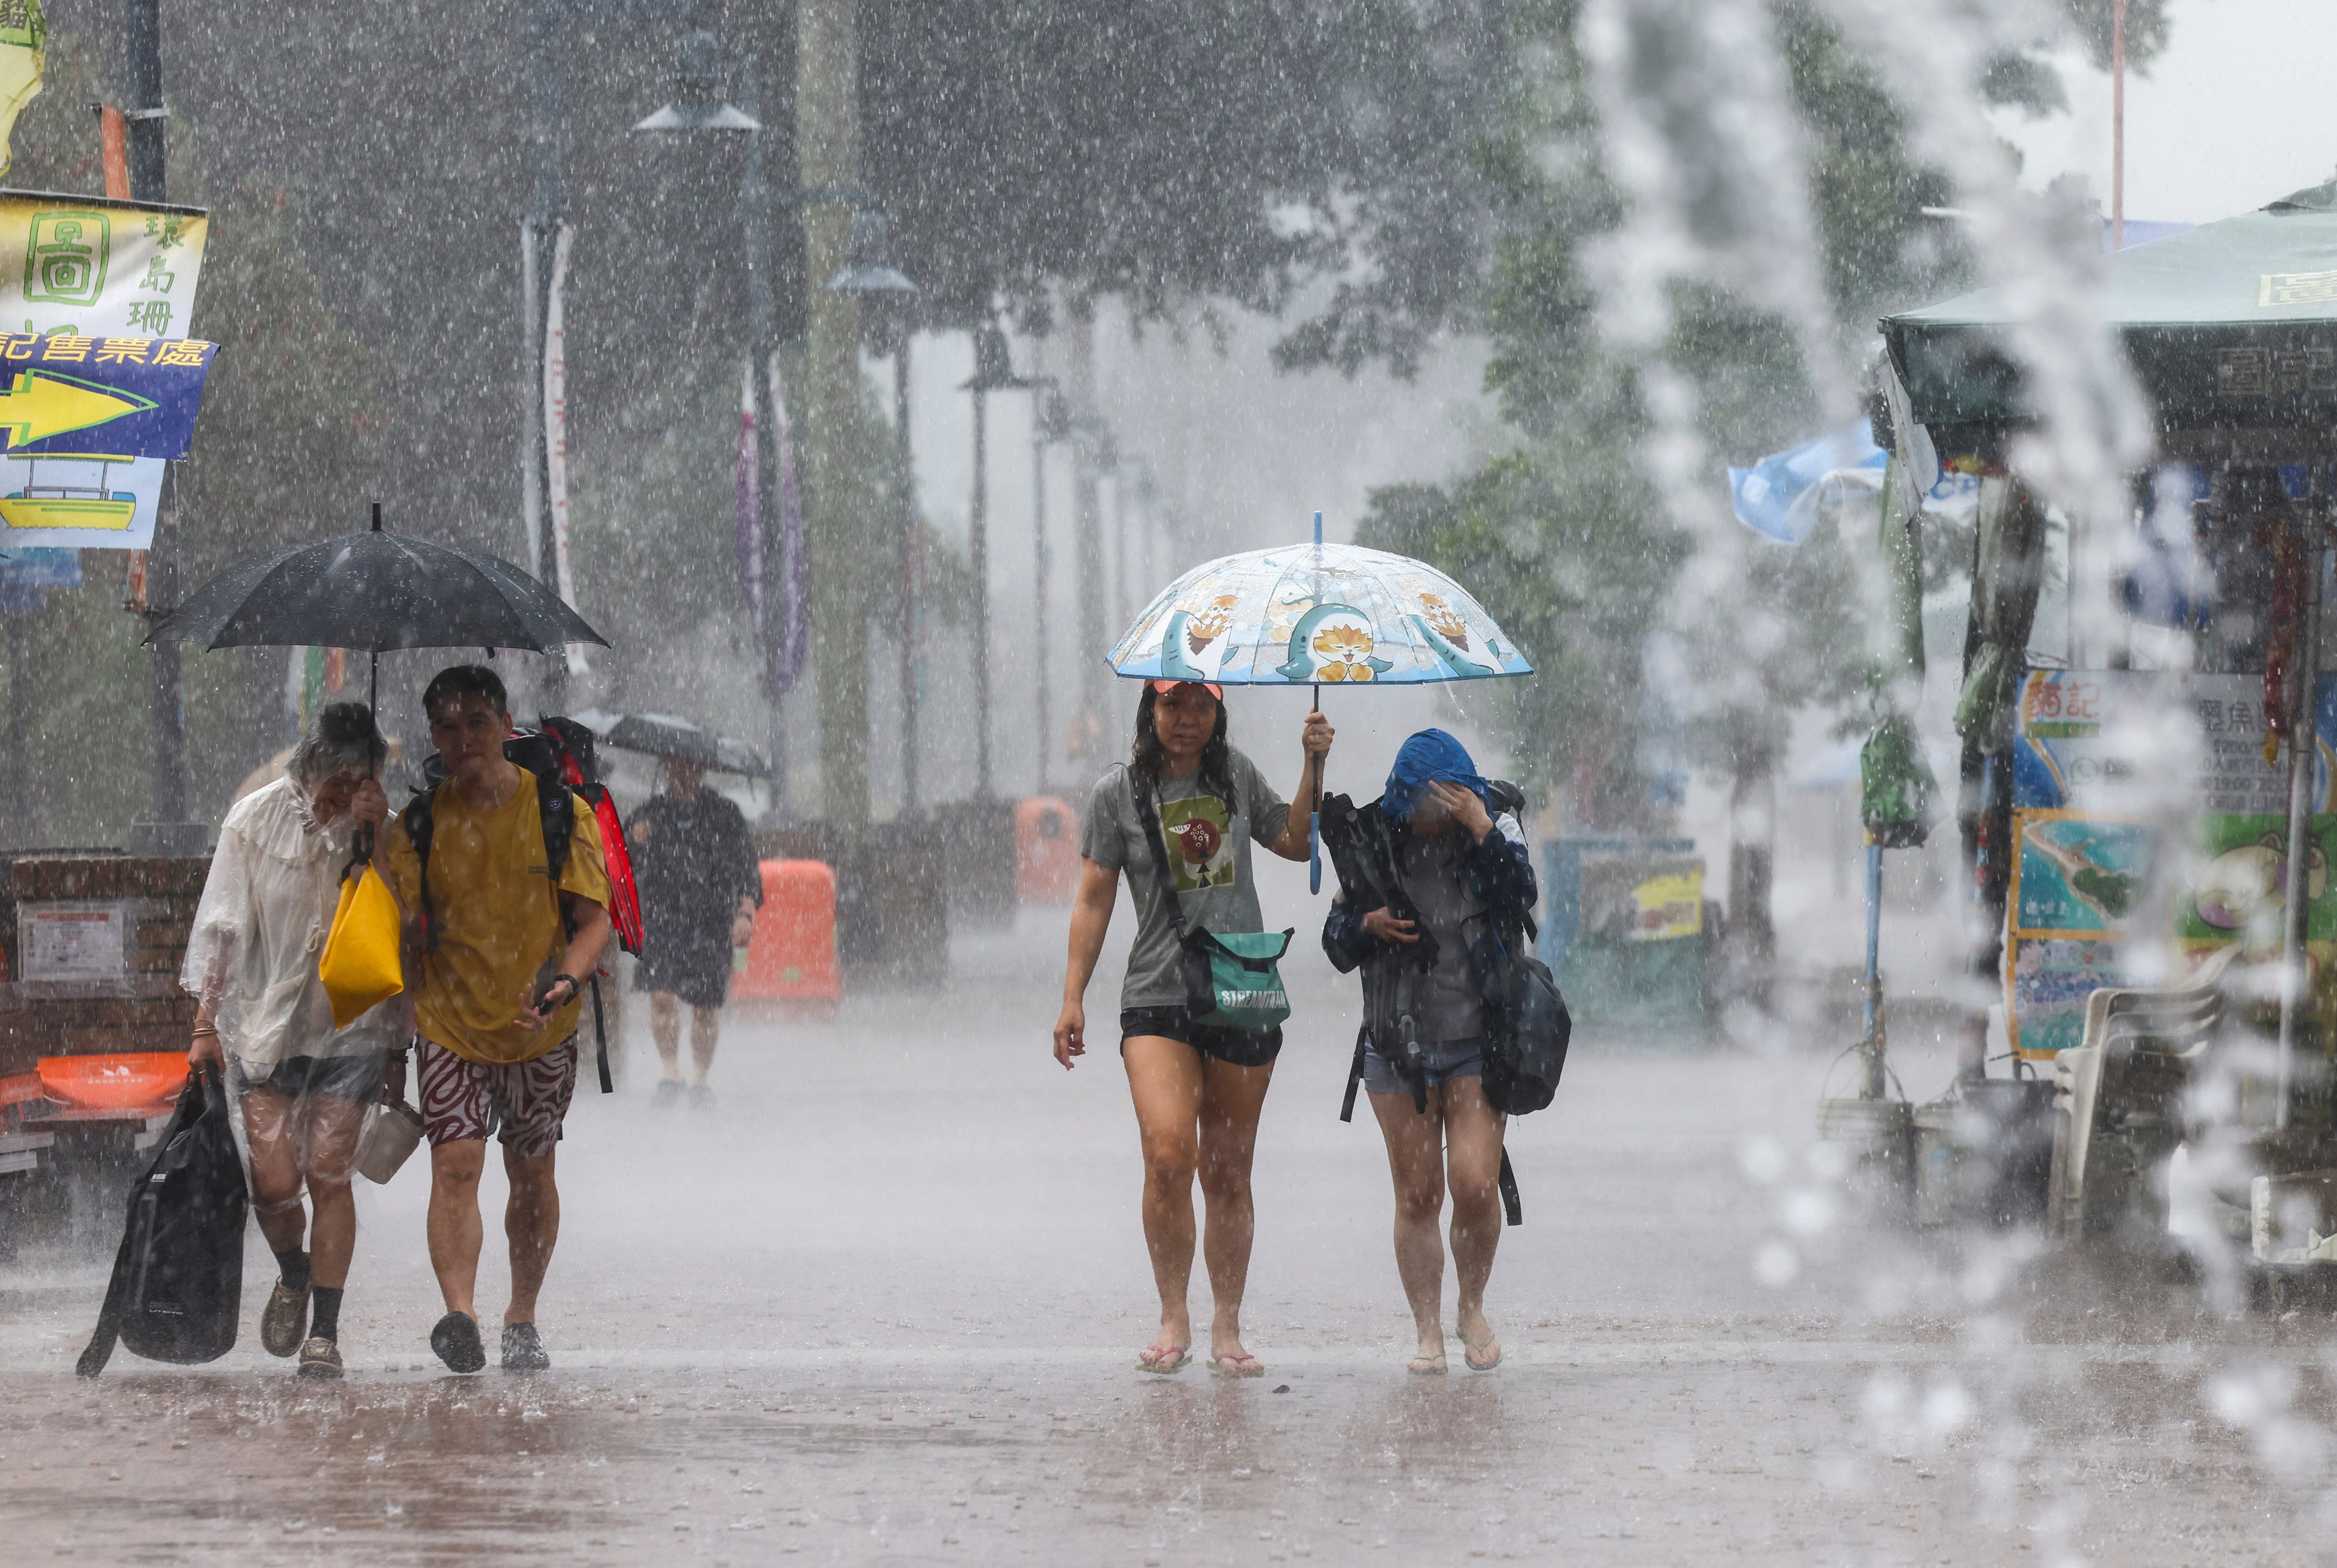 Hongkongers can expect eight days of rain from Sunday, the local forecasters has said. Photo: Dickson Lee